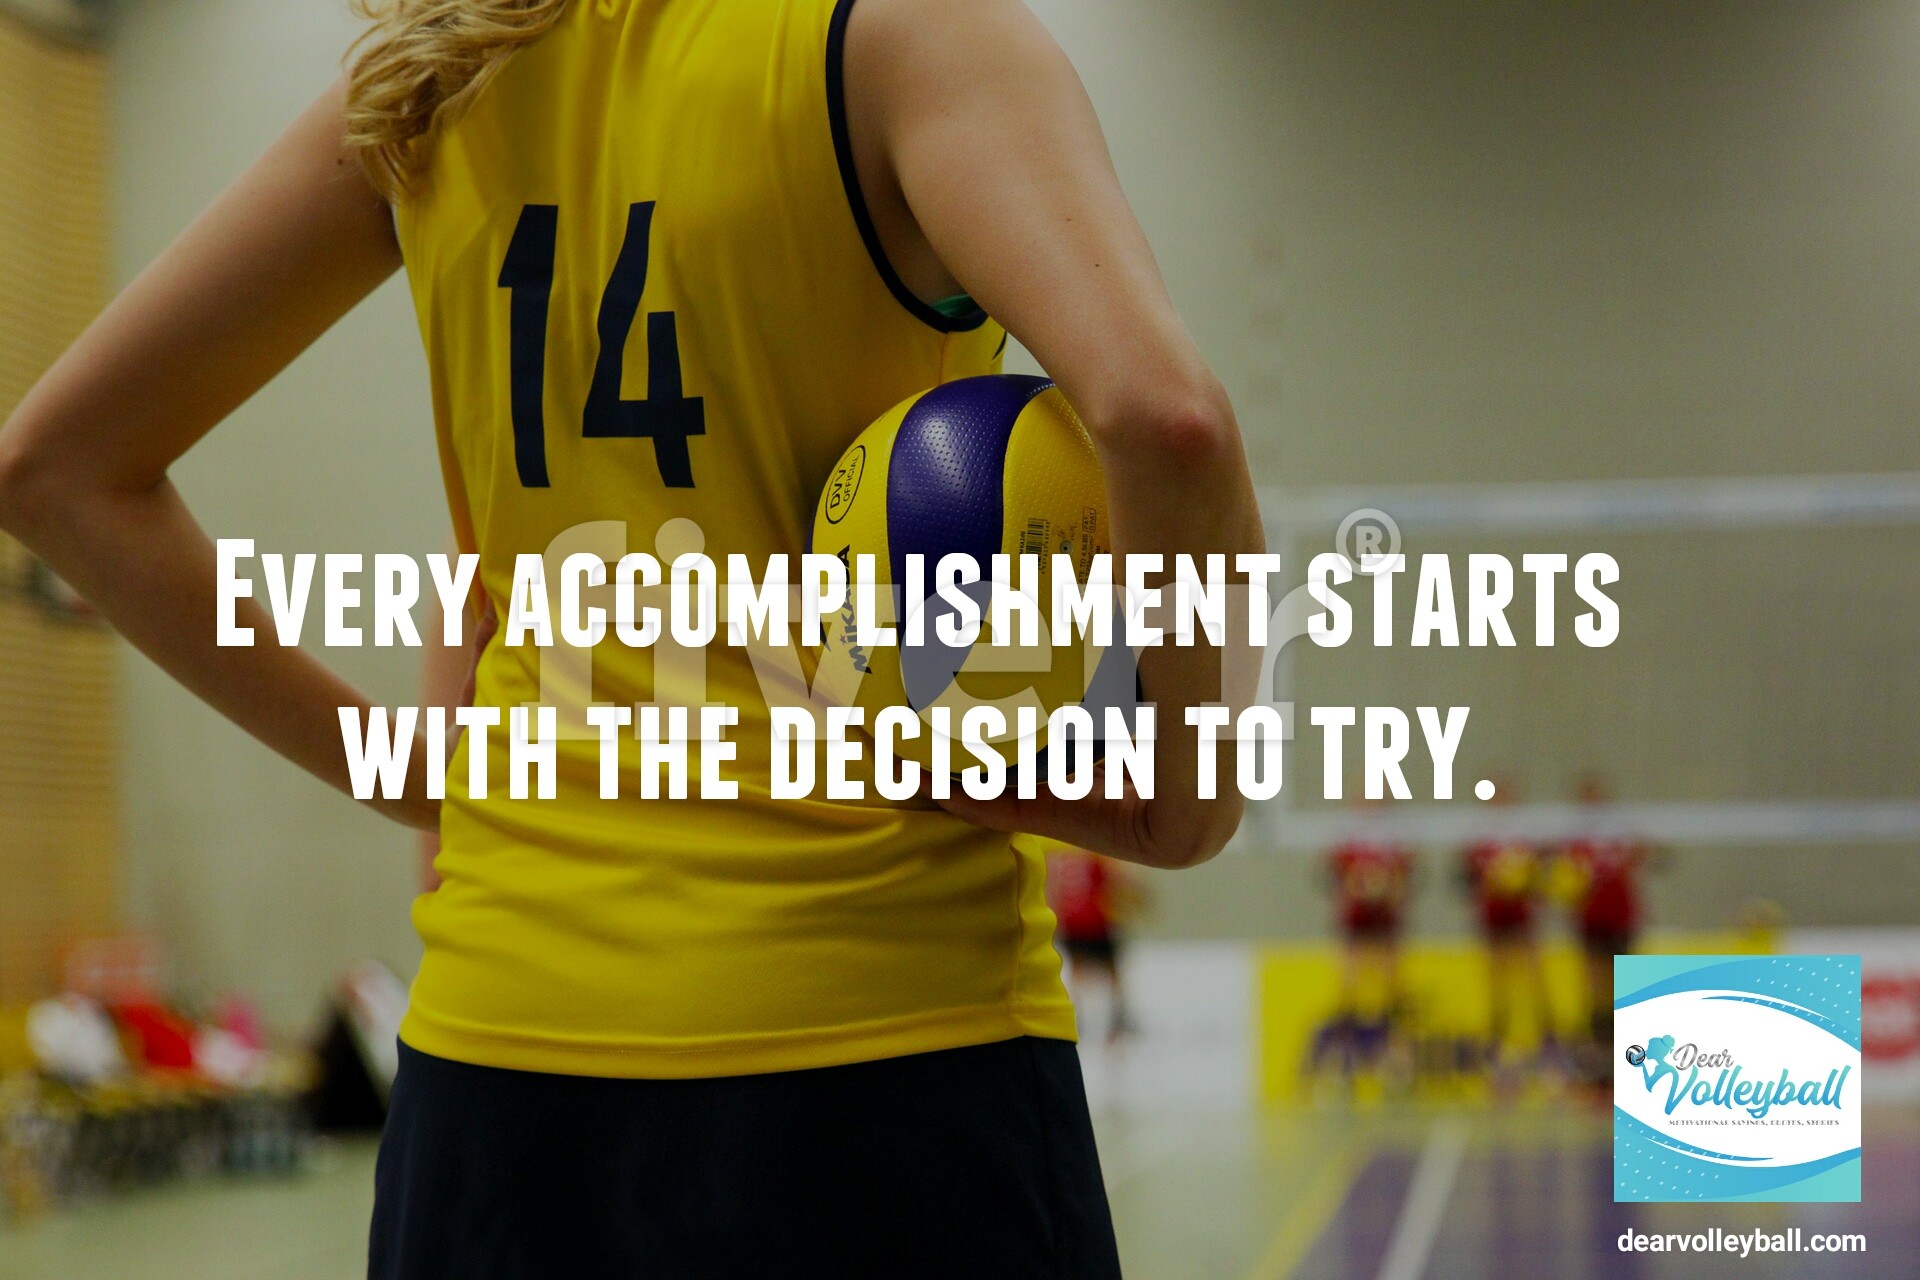 Every accomplishment starts with the decision to try and 54 short inspirational quotes on DearVolleyball.com